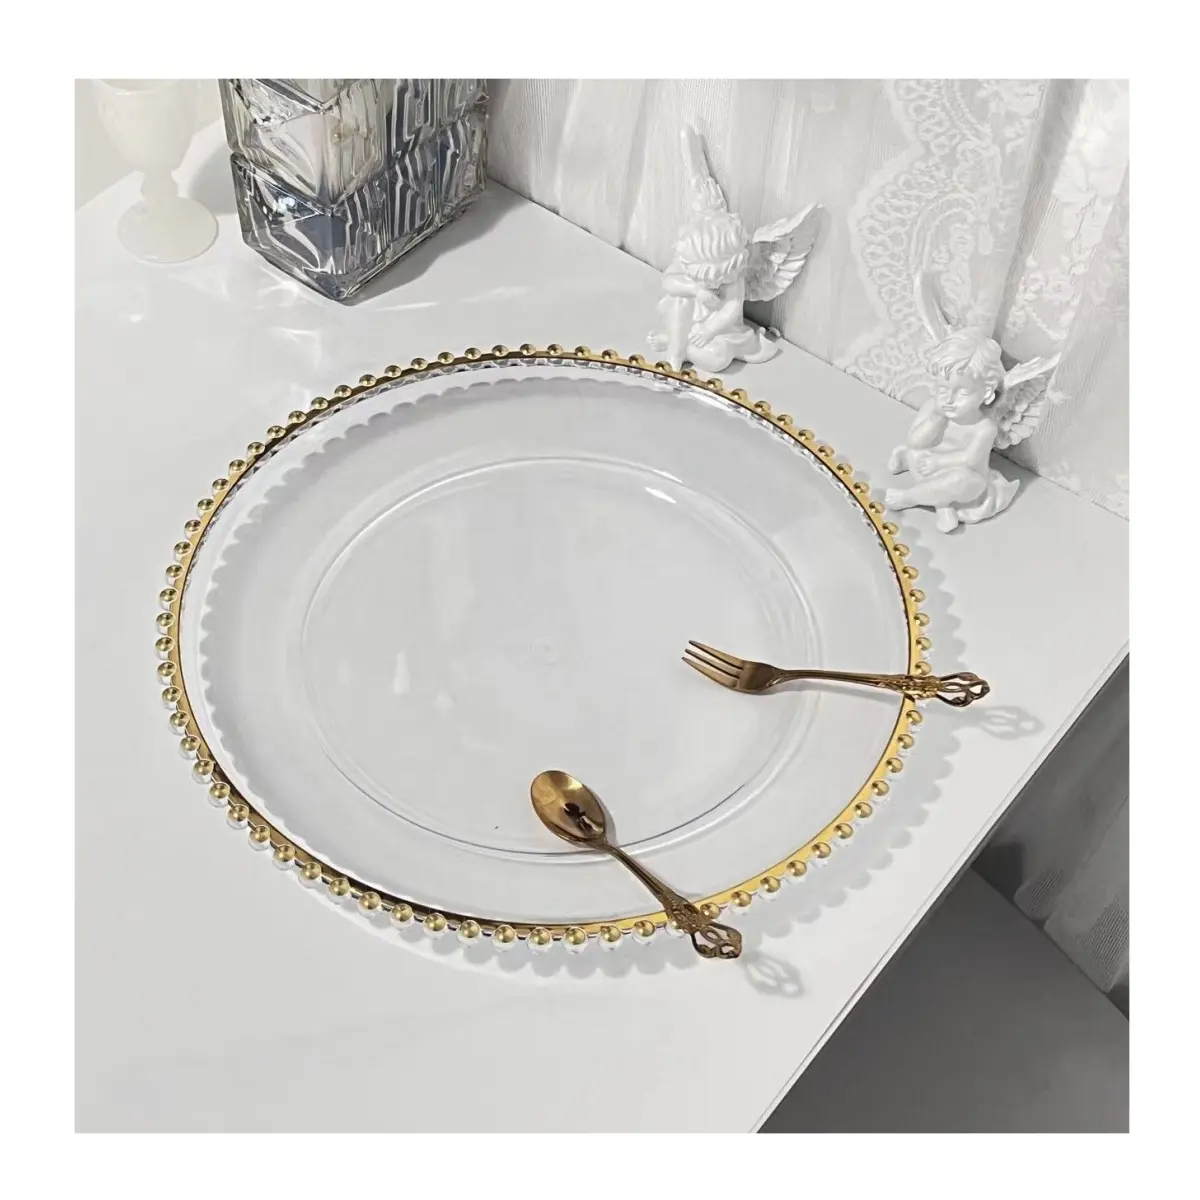 Bulk 13 Inches Clear Wedding Gold Rim Plates Wholesale Silver Beaded Charger Plates Dinnerware Set For Wedding Decoration